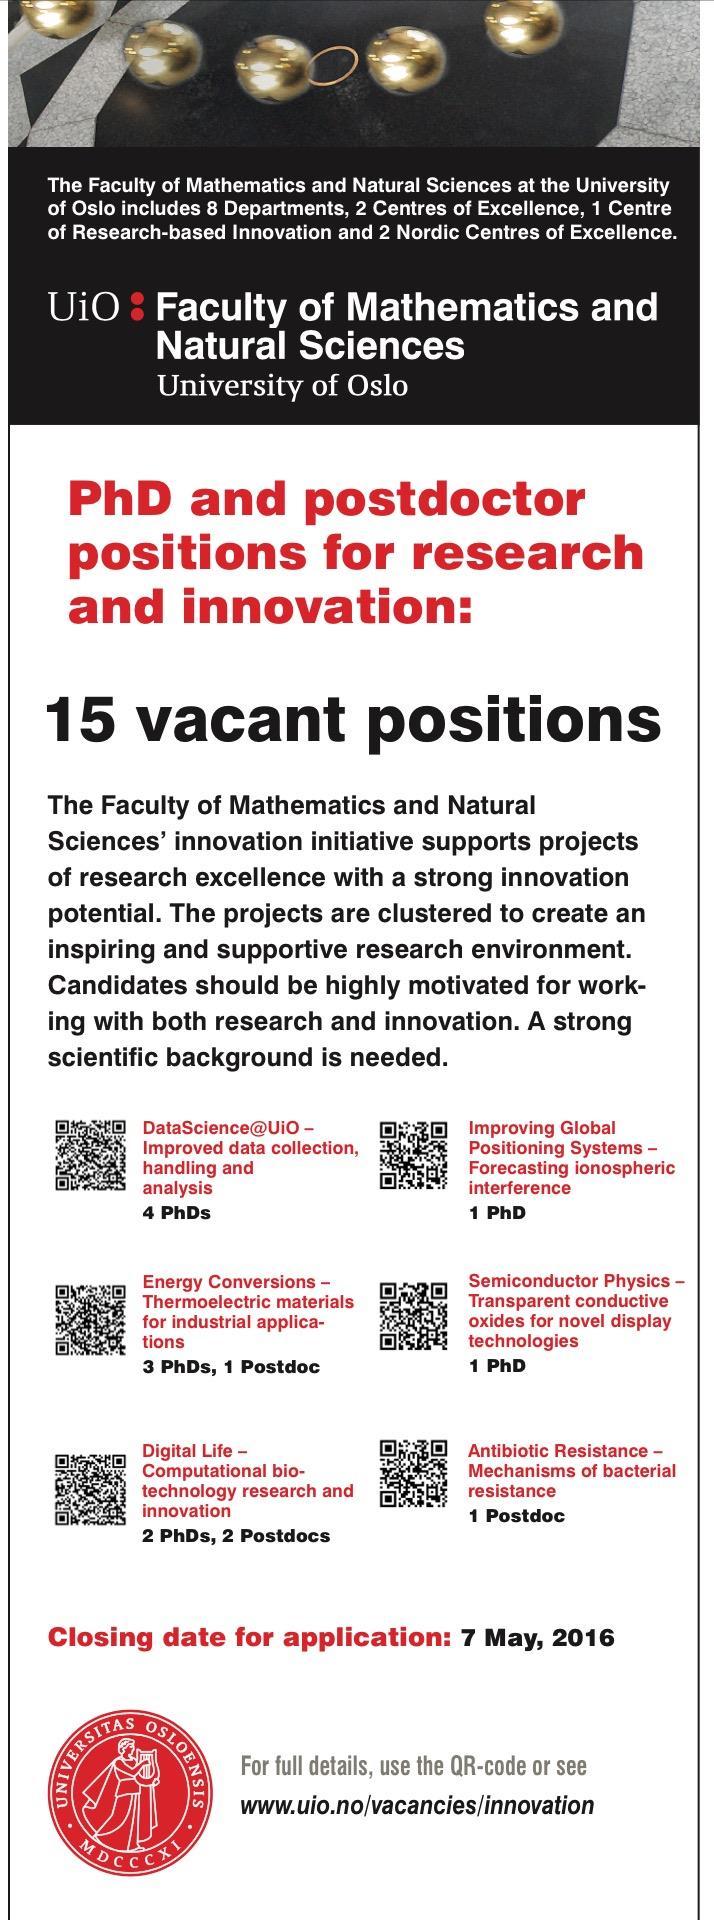 DataScience@UiO improved data collection, handling and analysis (4 PhD). Energy Conversion Thermoelectric material for industrial applications (3 PhD, 1 post.doc.